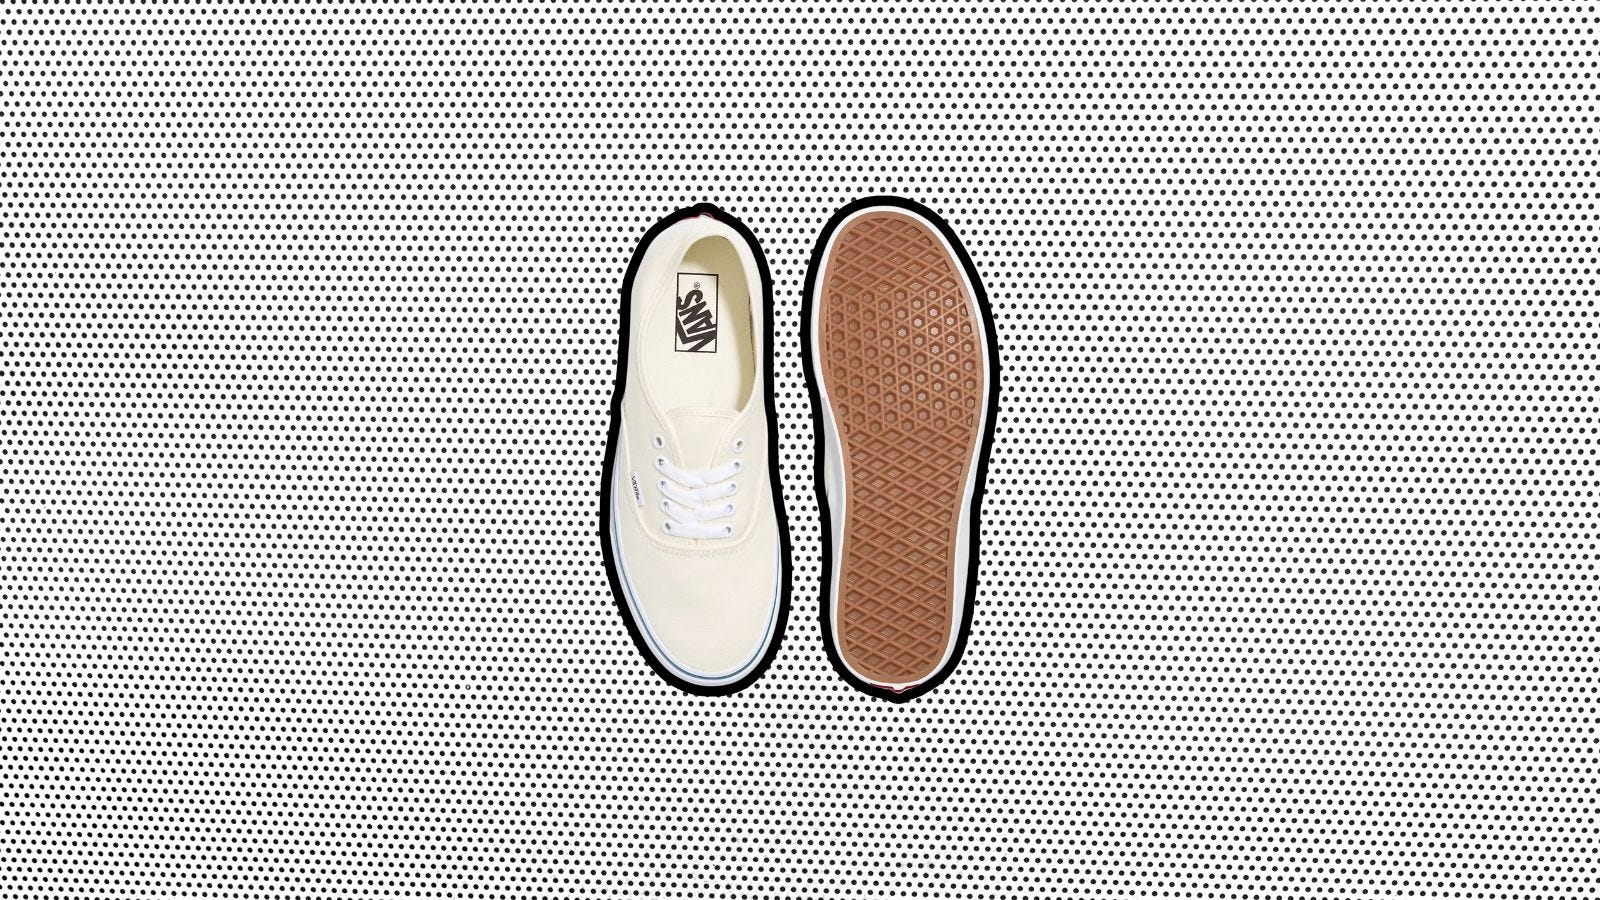 image of white canvas Vans sneakers against a black and white background